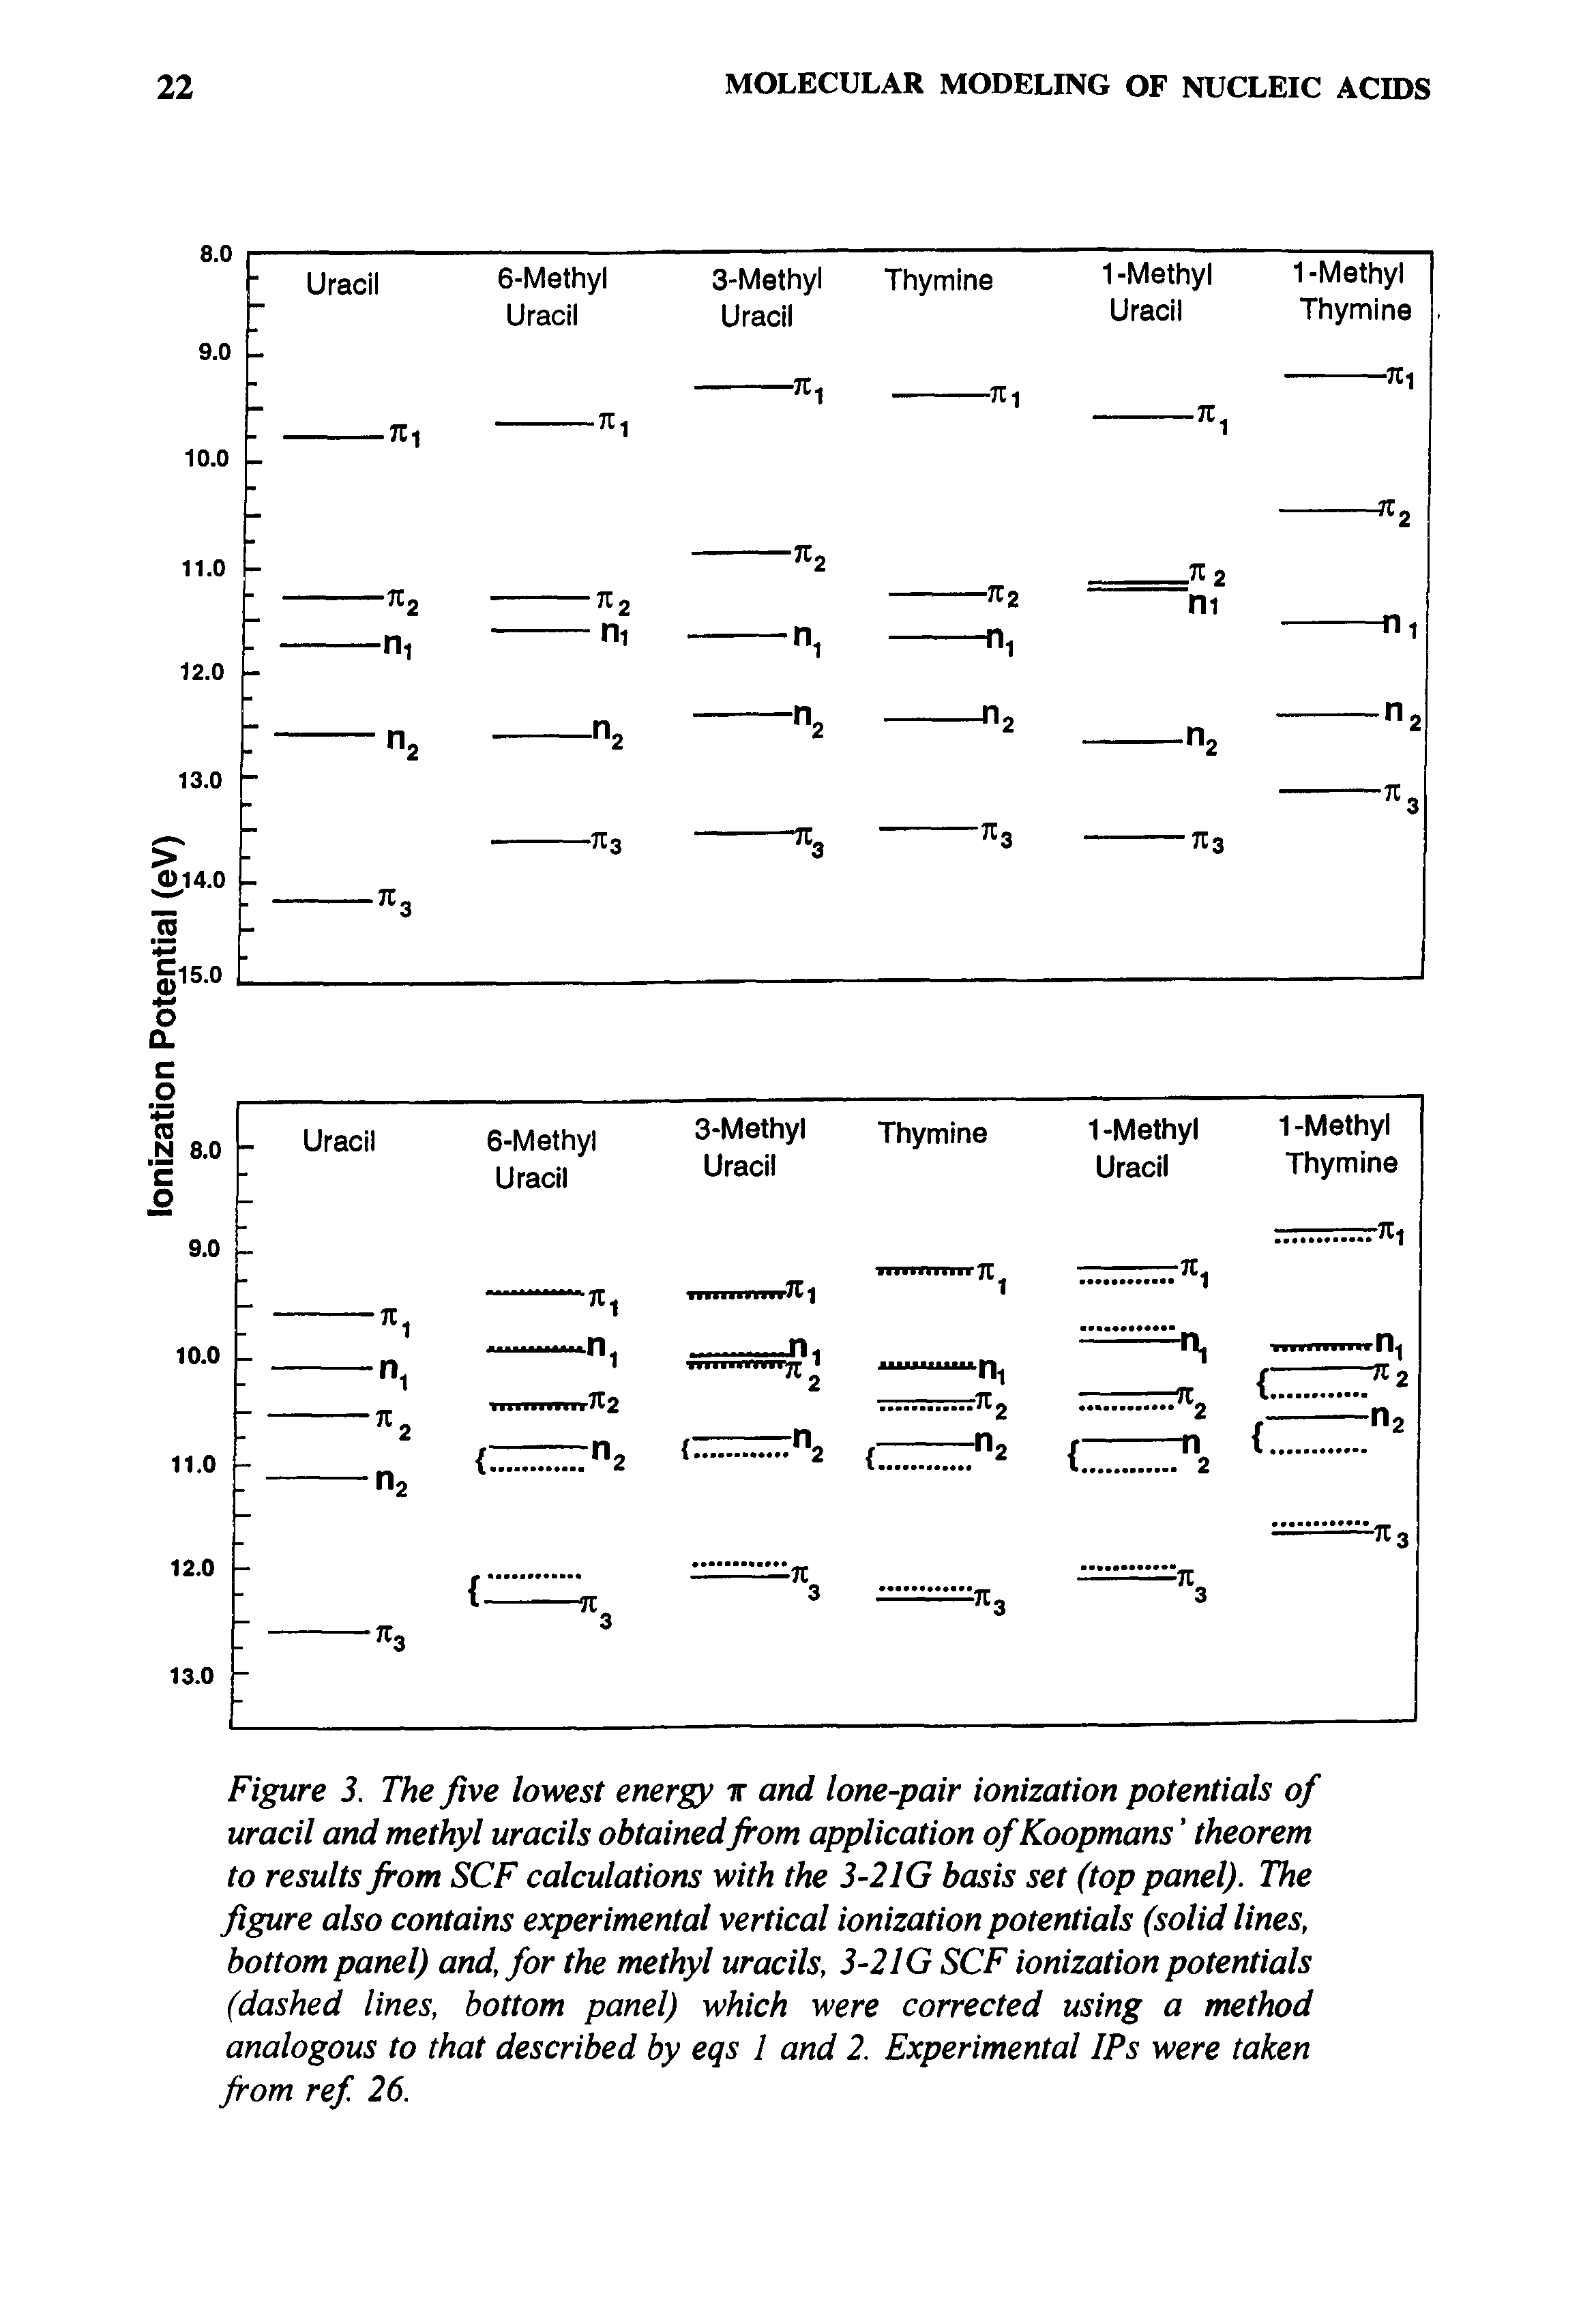 Figure 3. The five lowest energy ir and lone-pair ionization potentials of uracil and methyl uracils obtained from application of Koopmans theorem to results from SCF calculations with the 3-2IG basis set (top panel). The figure also contains experimental vertical ionization potentials (solid lines, bottom panel) and, for the methyl uracils, 3-2IG SCF ionization potentials (dashed lines, bottom panel) which were corrected using a method analogous to that described by eqs 1 and 2. Experimental IPs were taken from ref 26.